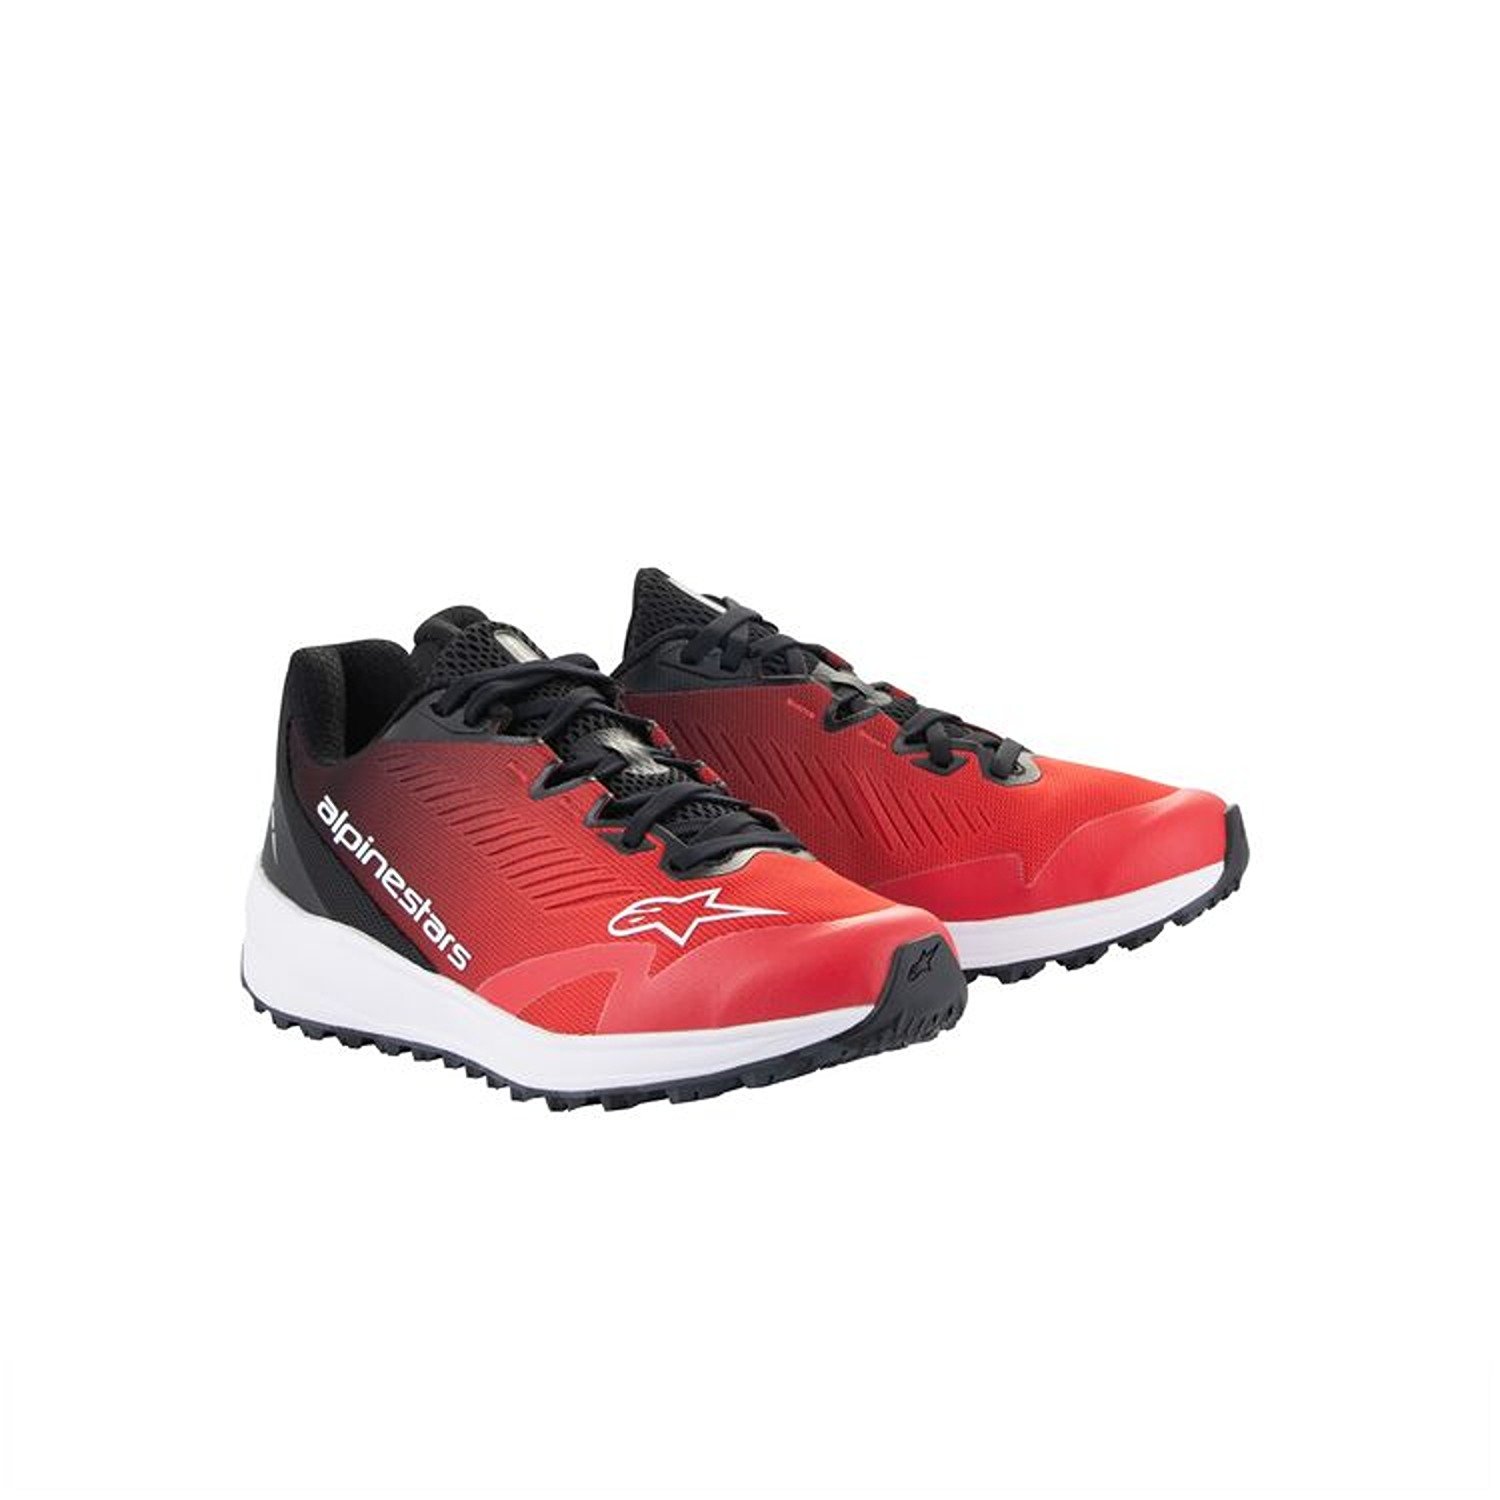 Image of Alpinestars Meta Road V2 Shoes Red Black White Taille US 125